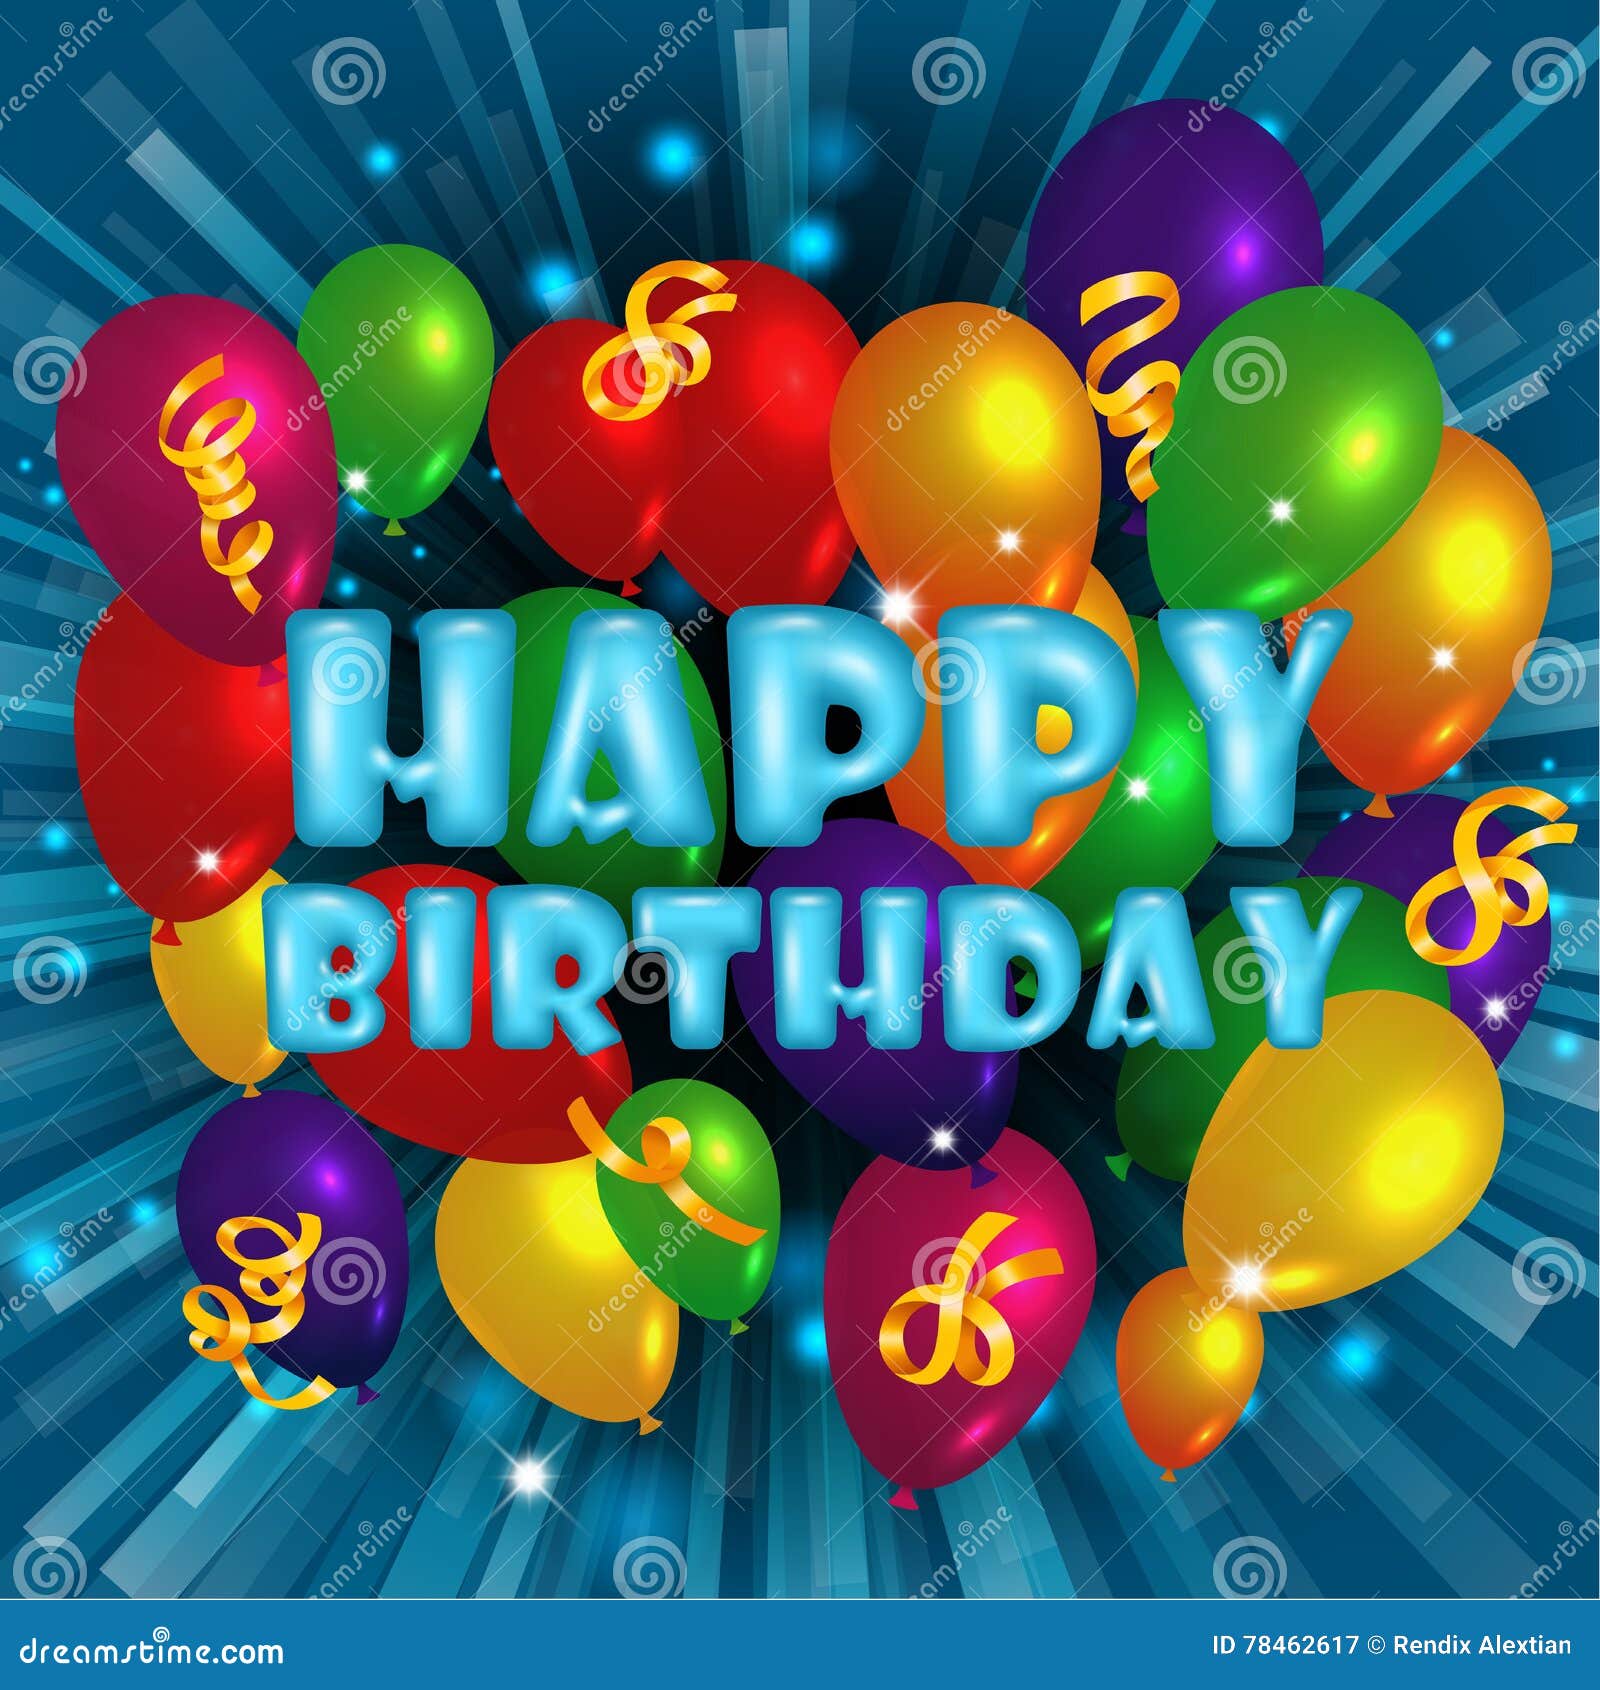 Happy Birthday Greeting Card with Balloons and Confetti Stock Vector ...